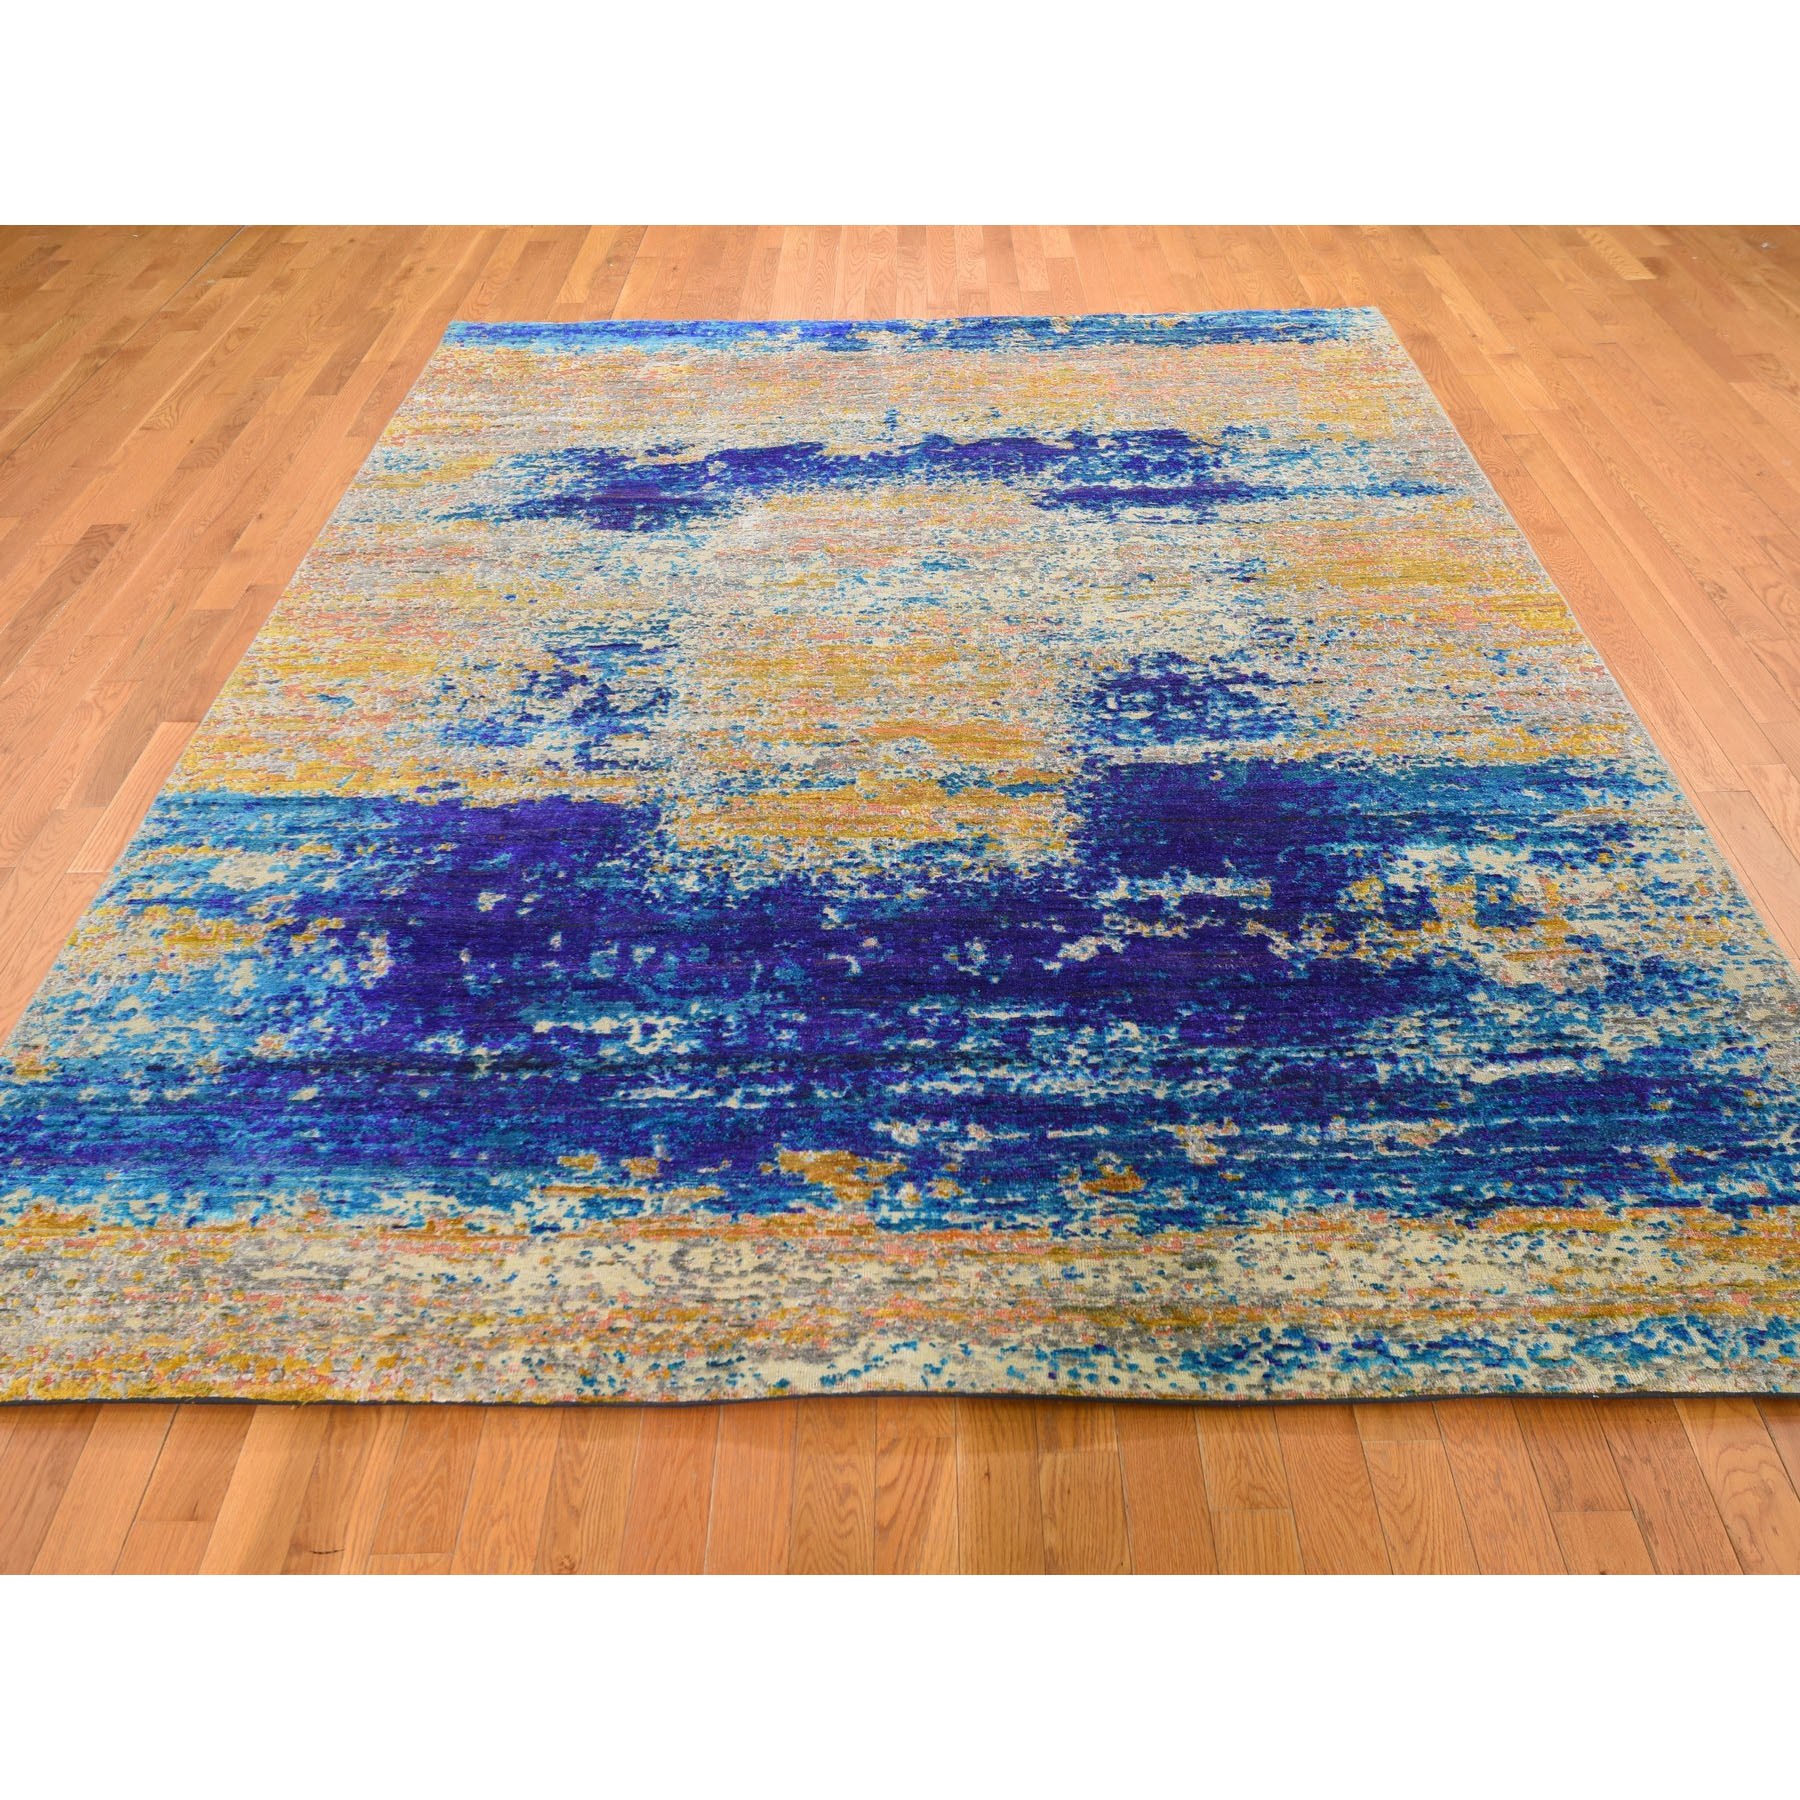 7-10 x10- Yellow Sari Silk With Textured Wool Abstract Hand Knotted Oriental Rug 